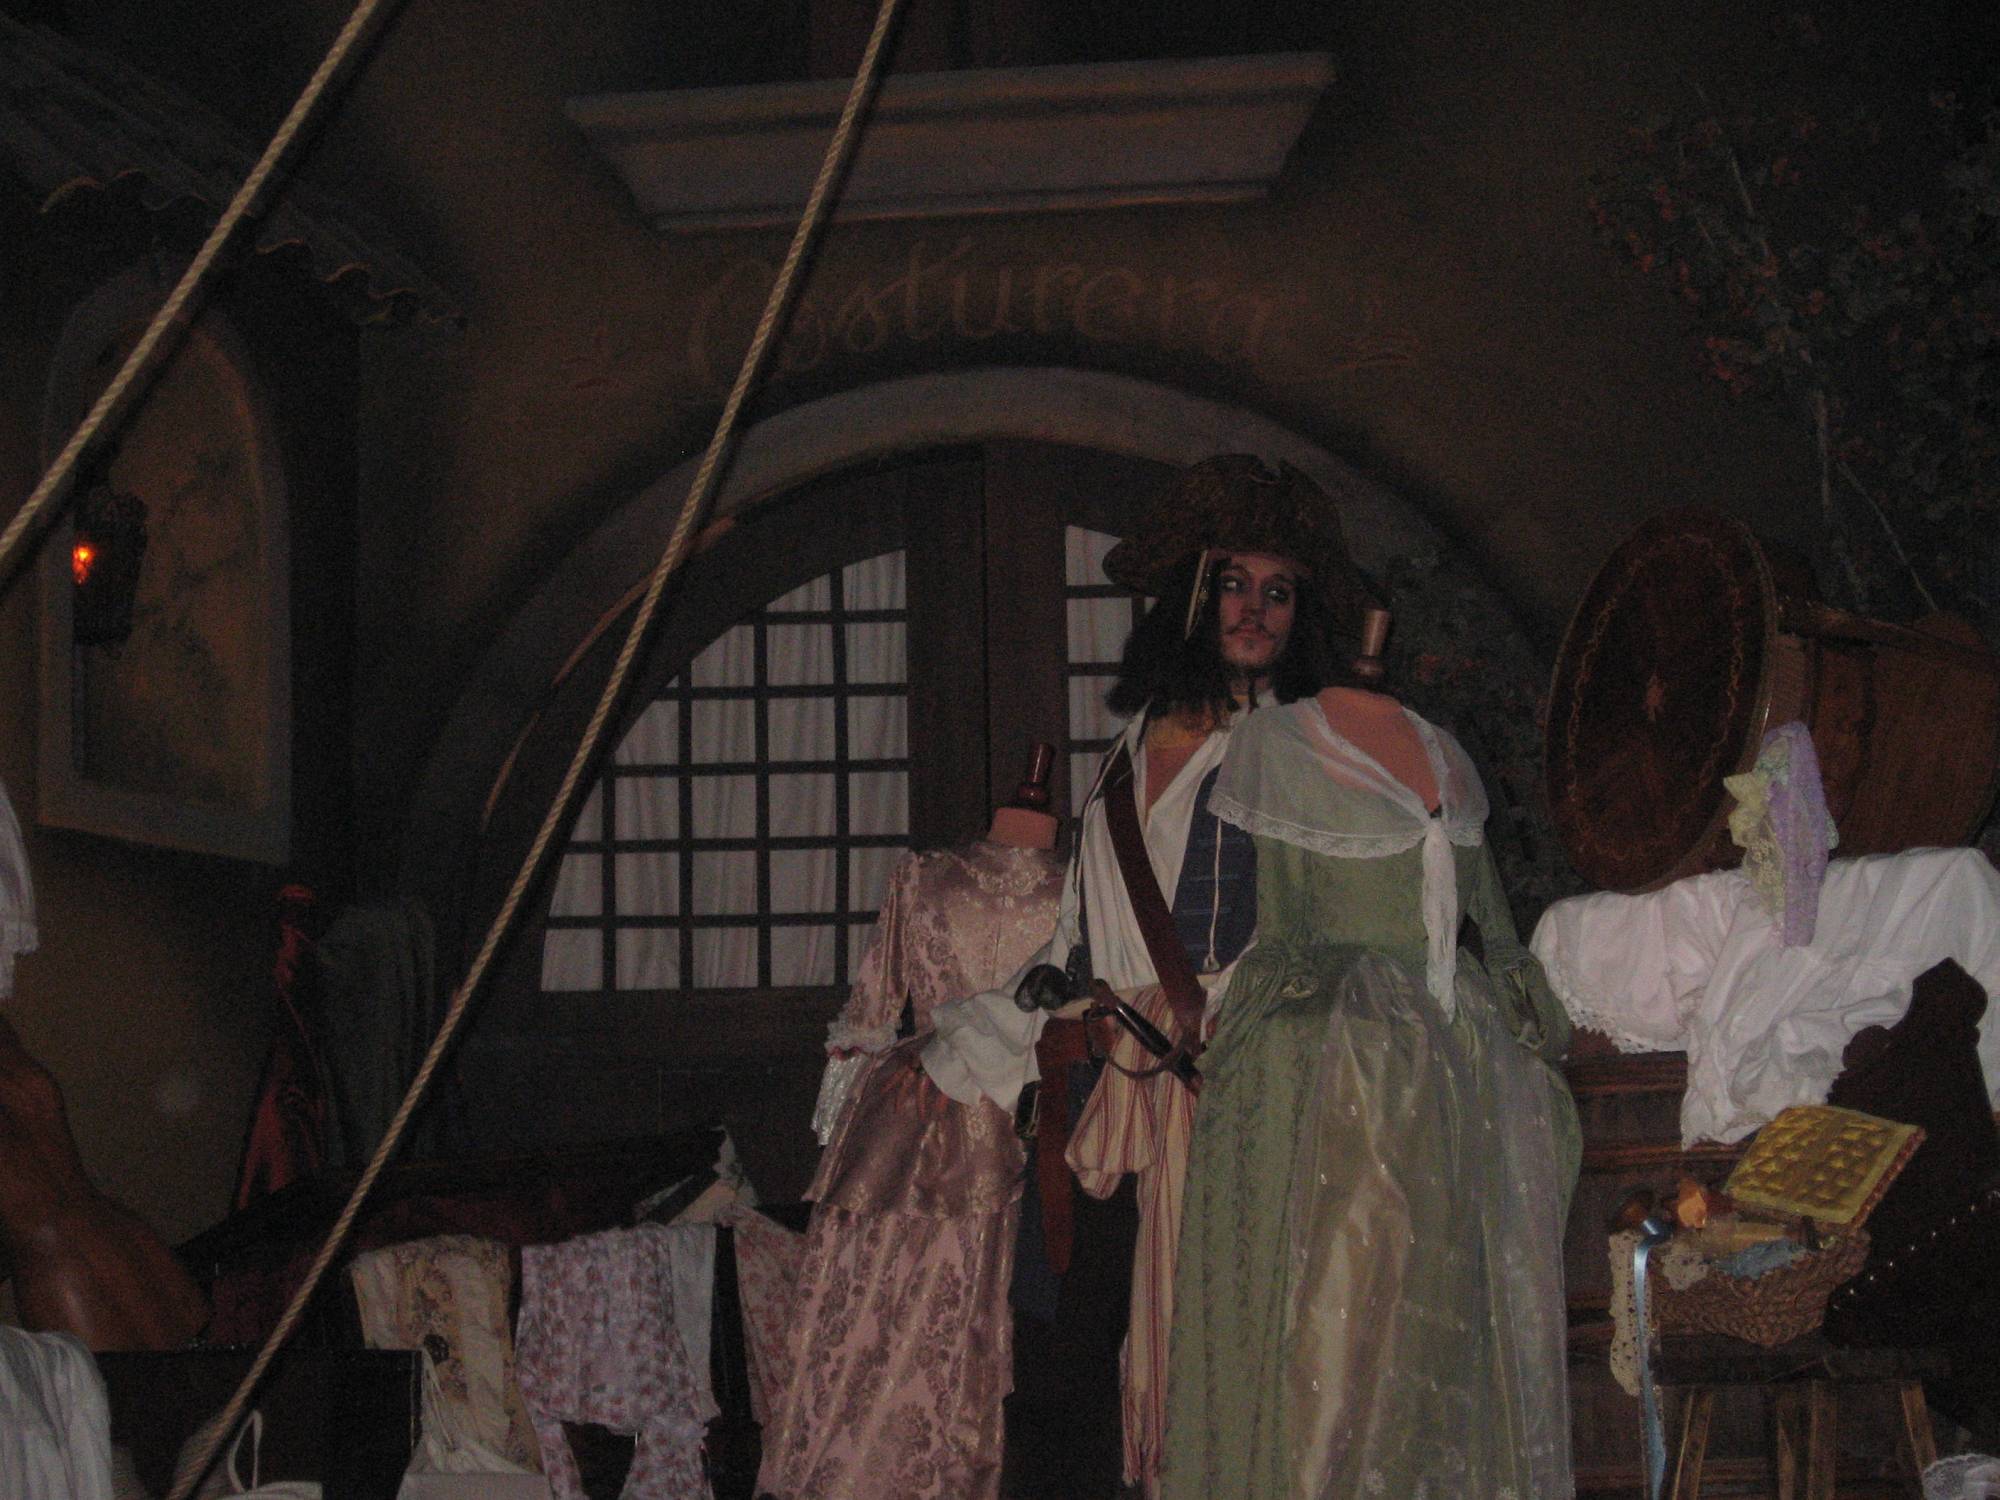 New Orleans Square - Jack at Pirates of the Caribbean